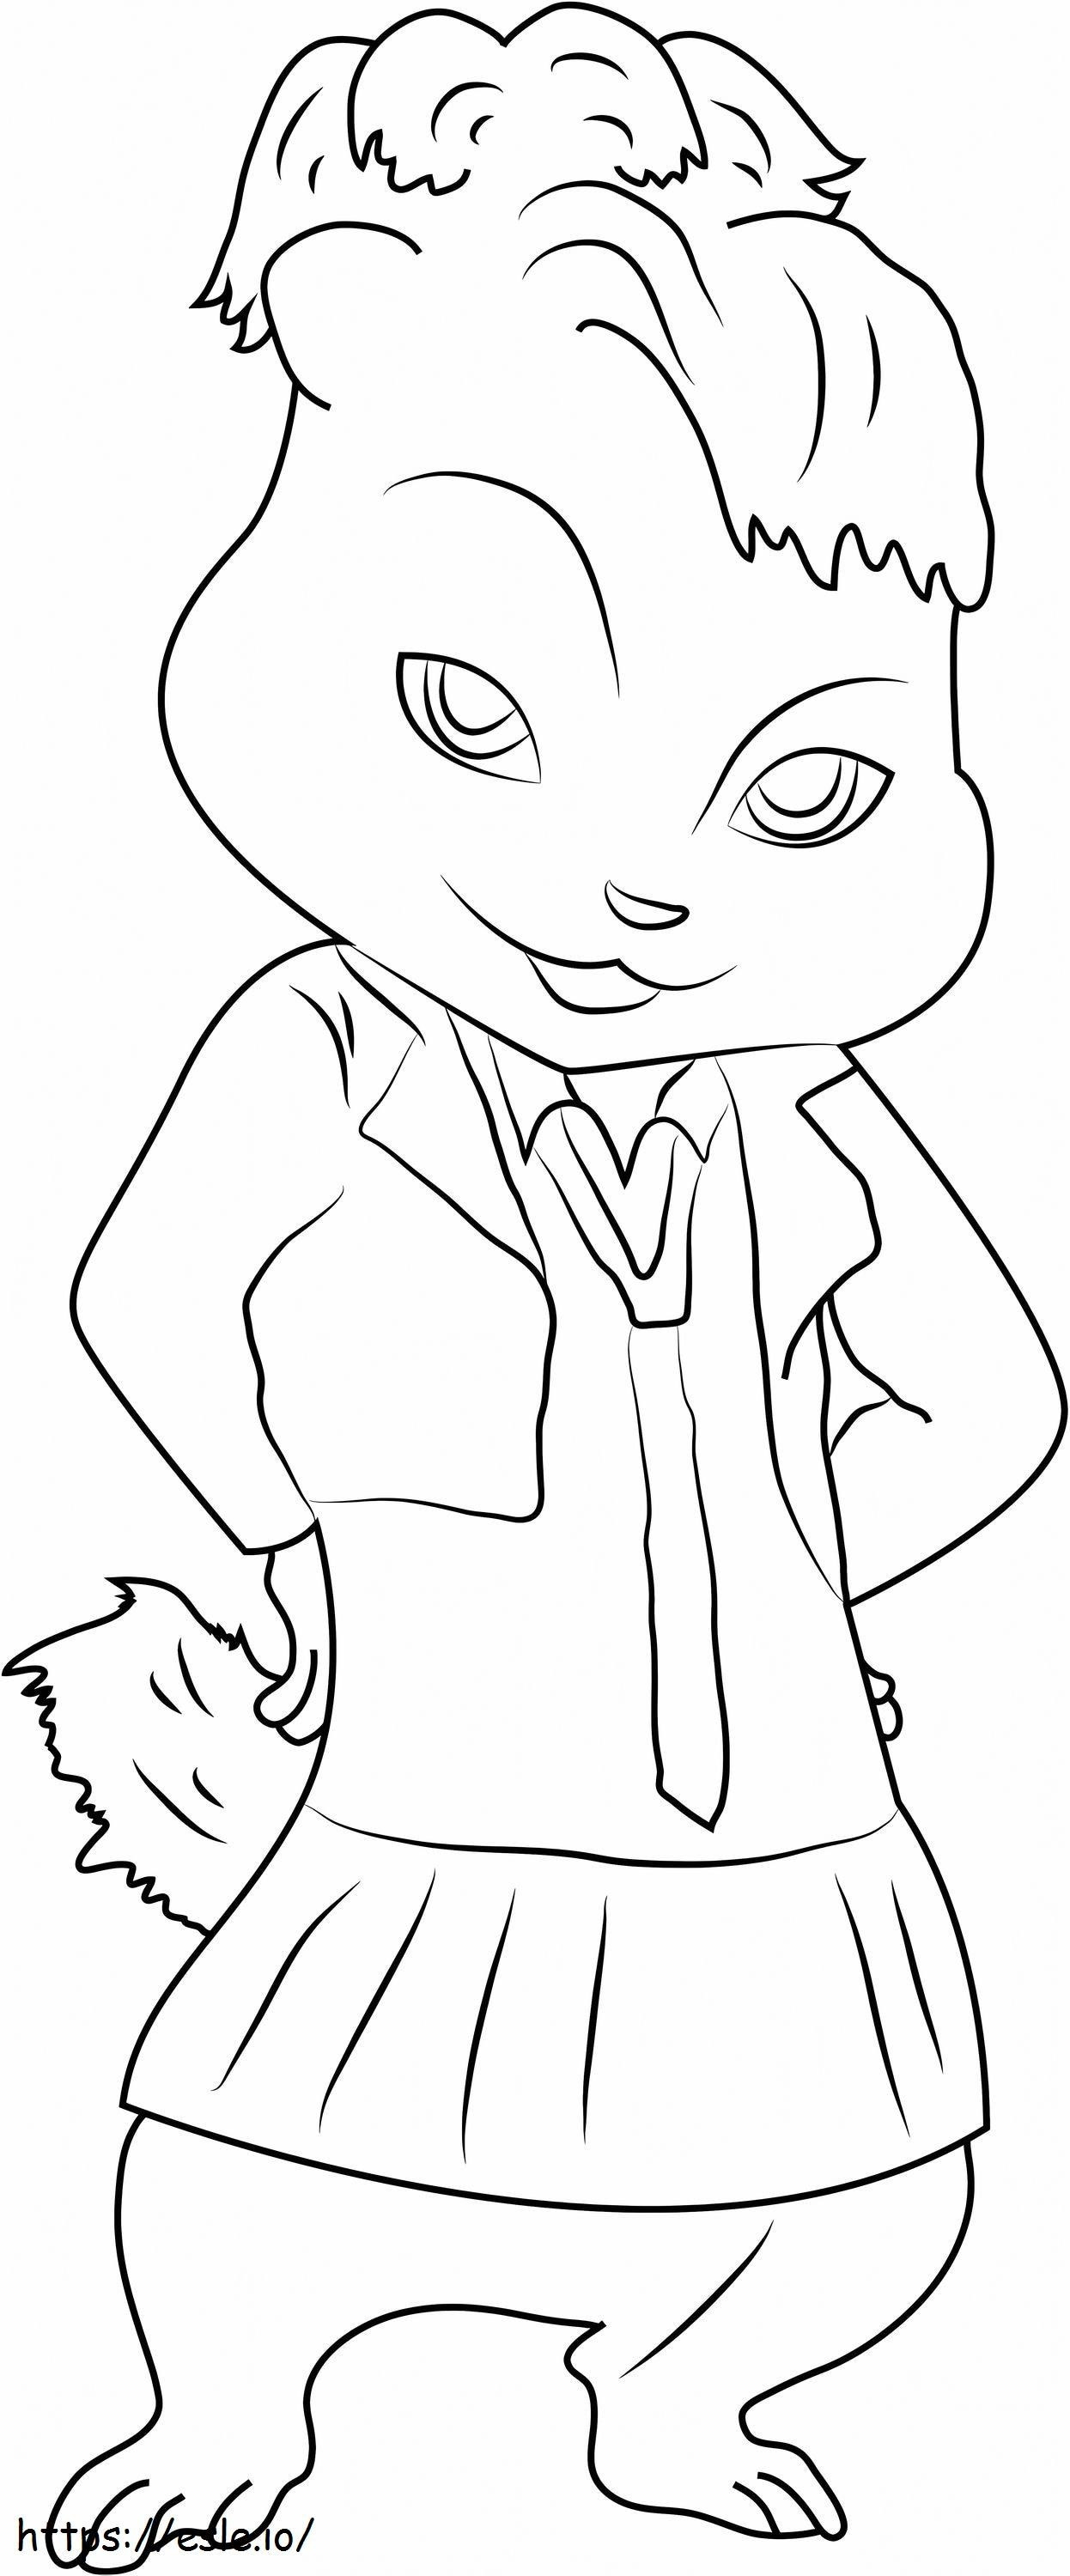 1532489929 Brittany Is Beautiful A4 coloring page